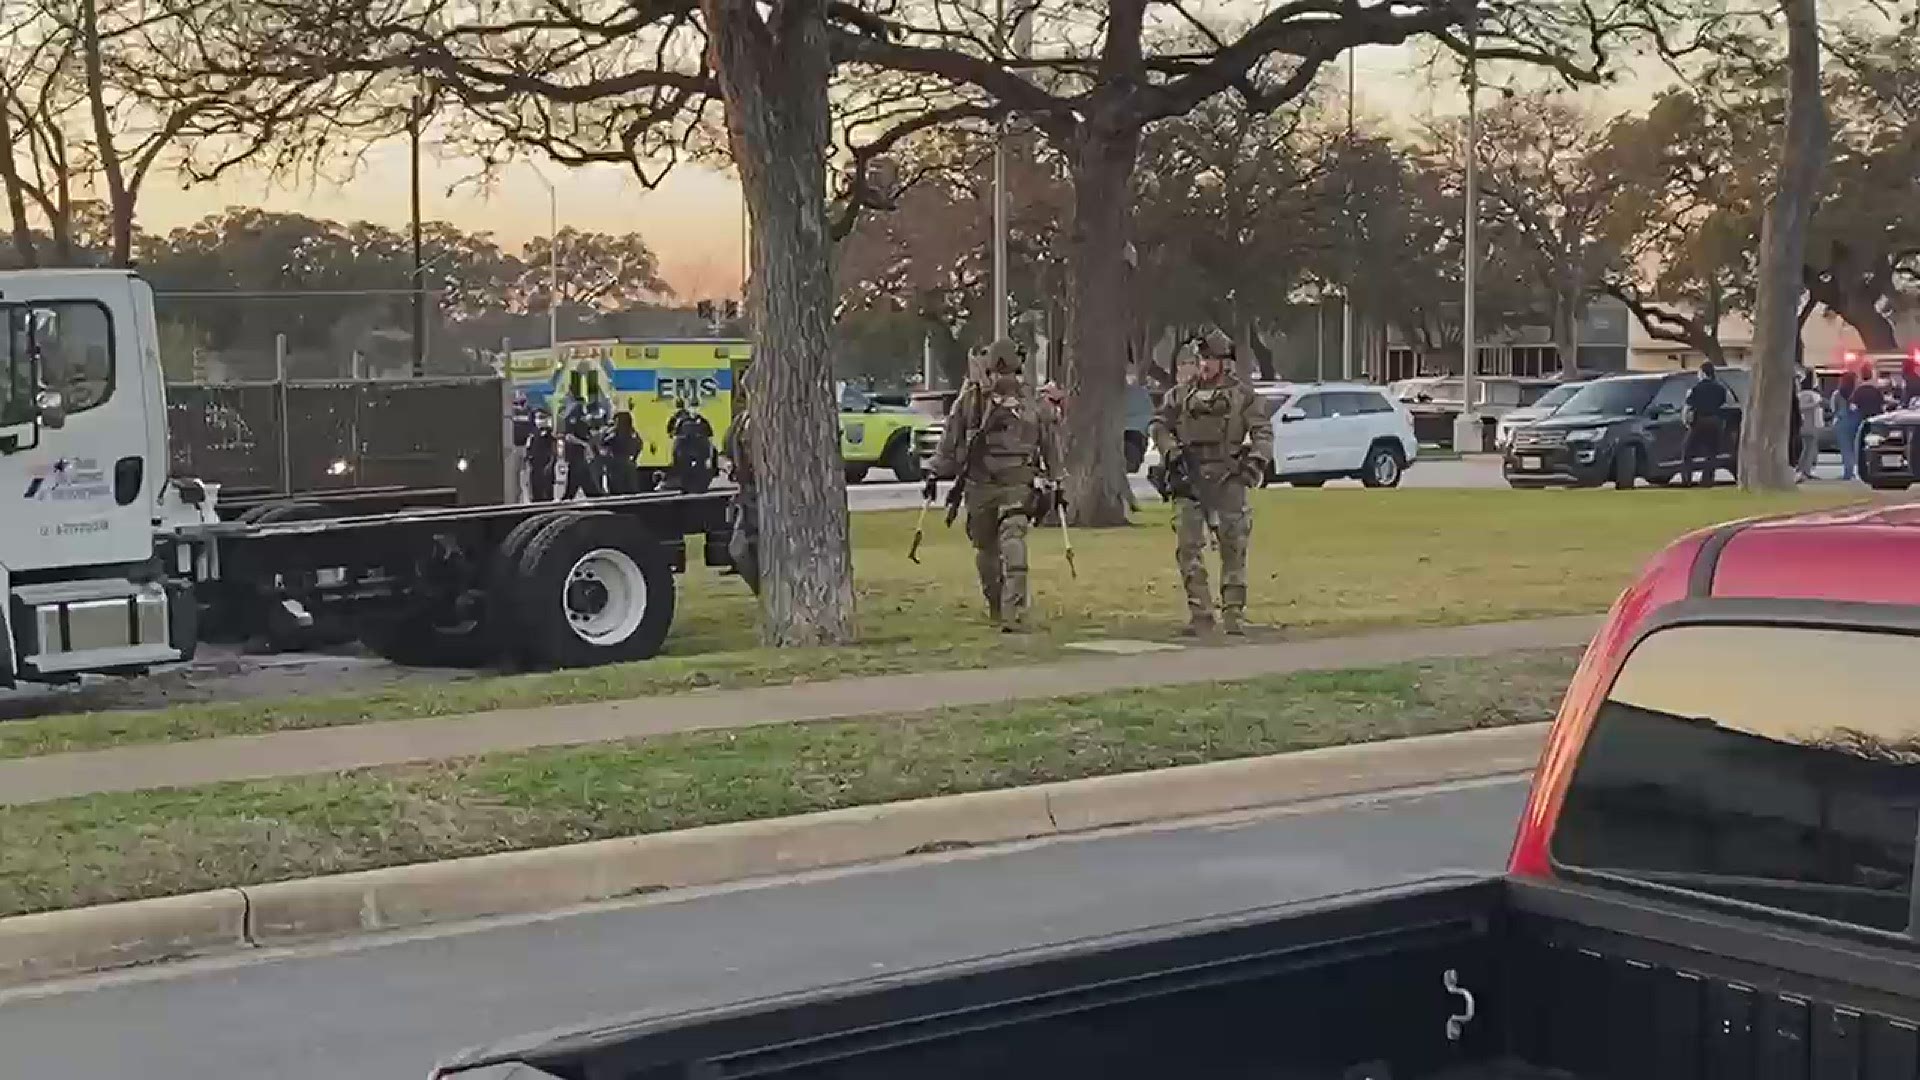 The SWAT team responded to a possible hostage situation in Central Austin on Tuesday evening. Video courtesy of Shiv Mishra and Nicolas Baumann.